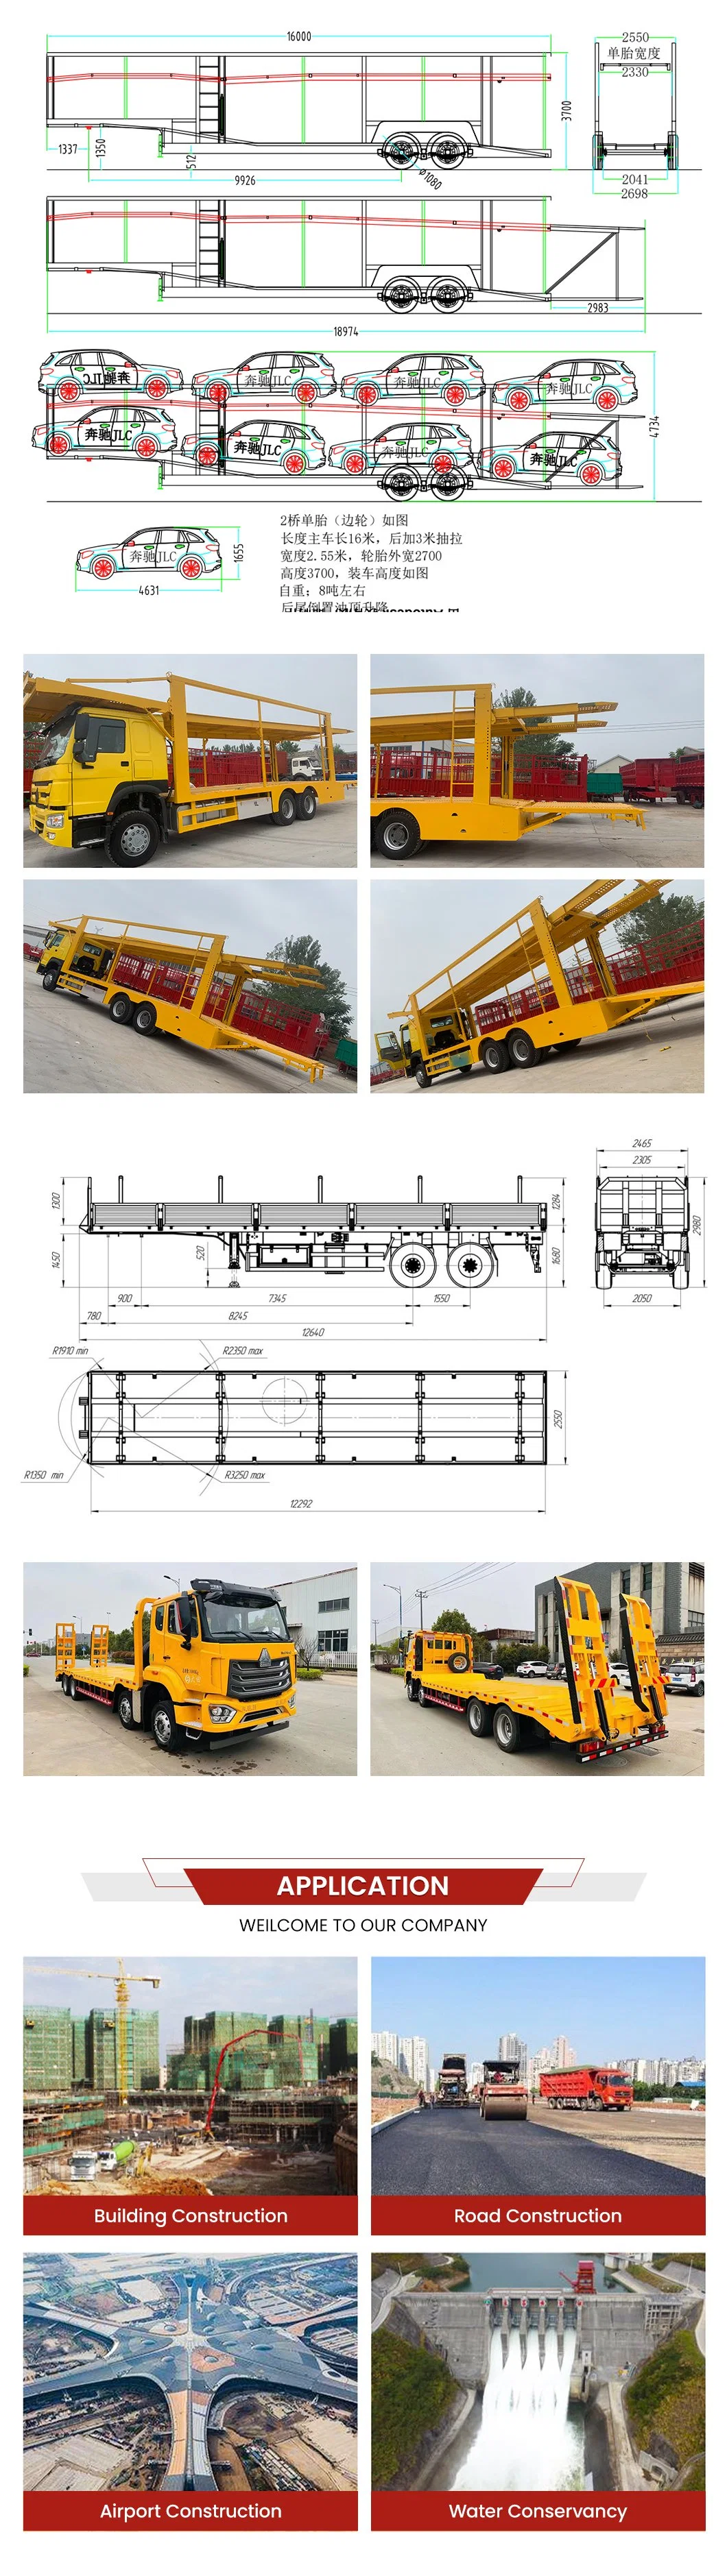 Anton&prime;s Main Export Vehicles, Factory Production, Chinese Suppliers, Manufacturers Selling, Made in China, Transport of Goods Vehicles, Trucks, Trailers